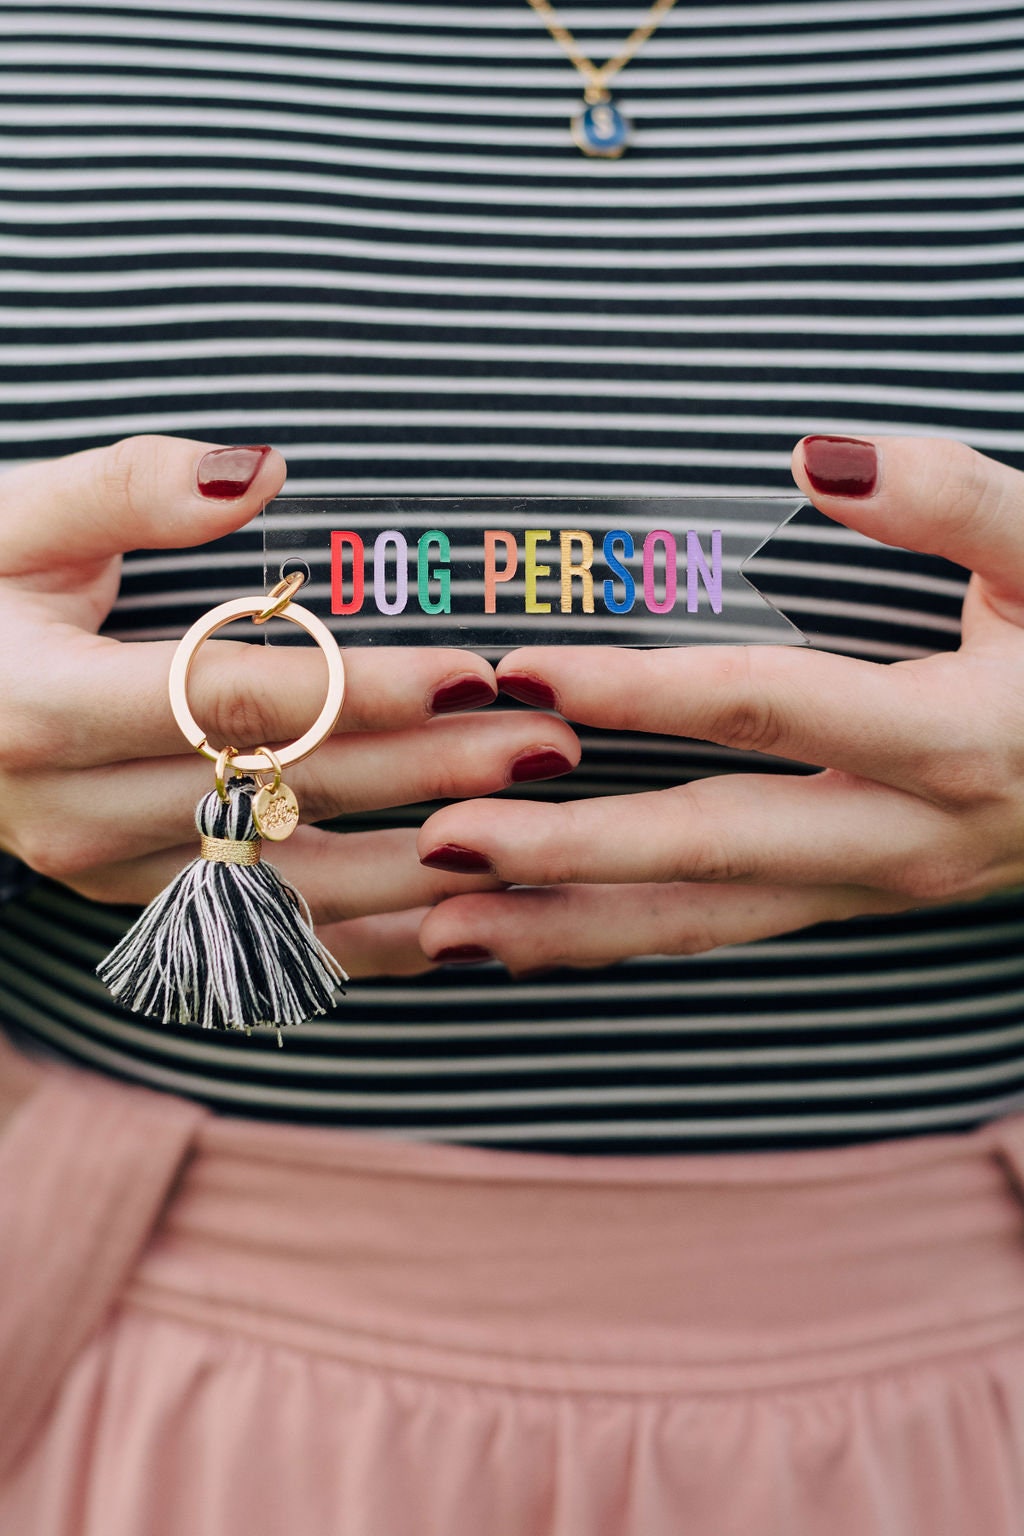 Personalised Initial Keyrings with Colourful Tassels  Keychain design,  Personalised keyrings, Acrylic keychains